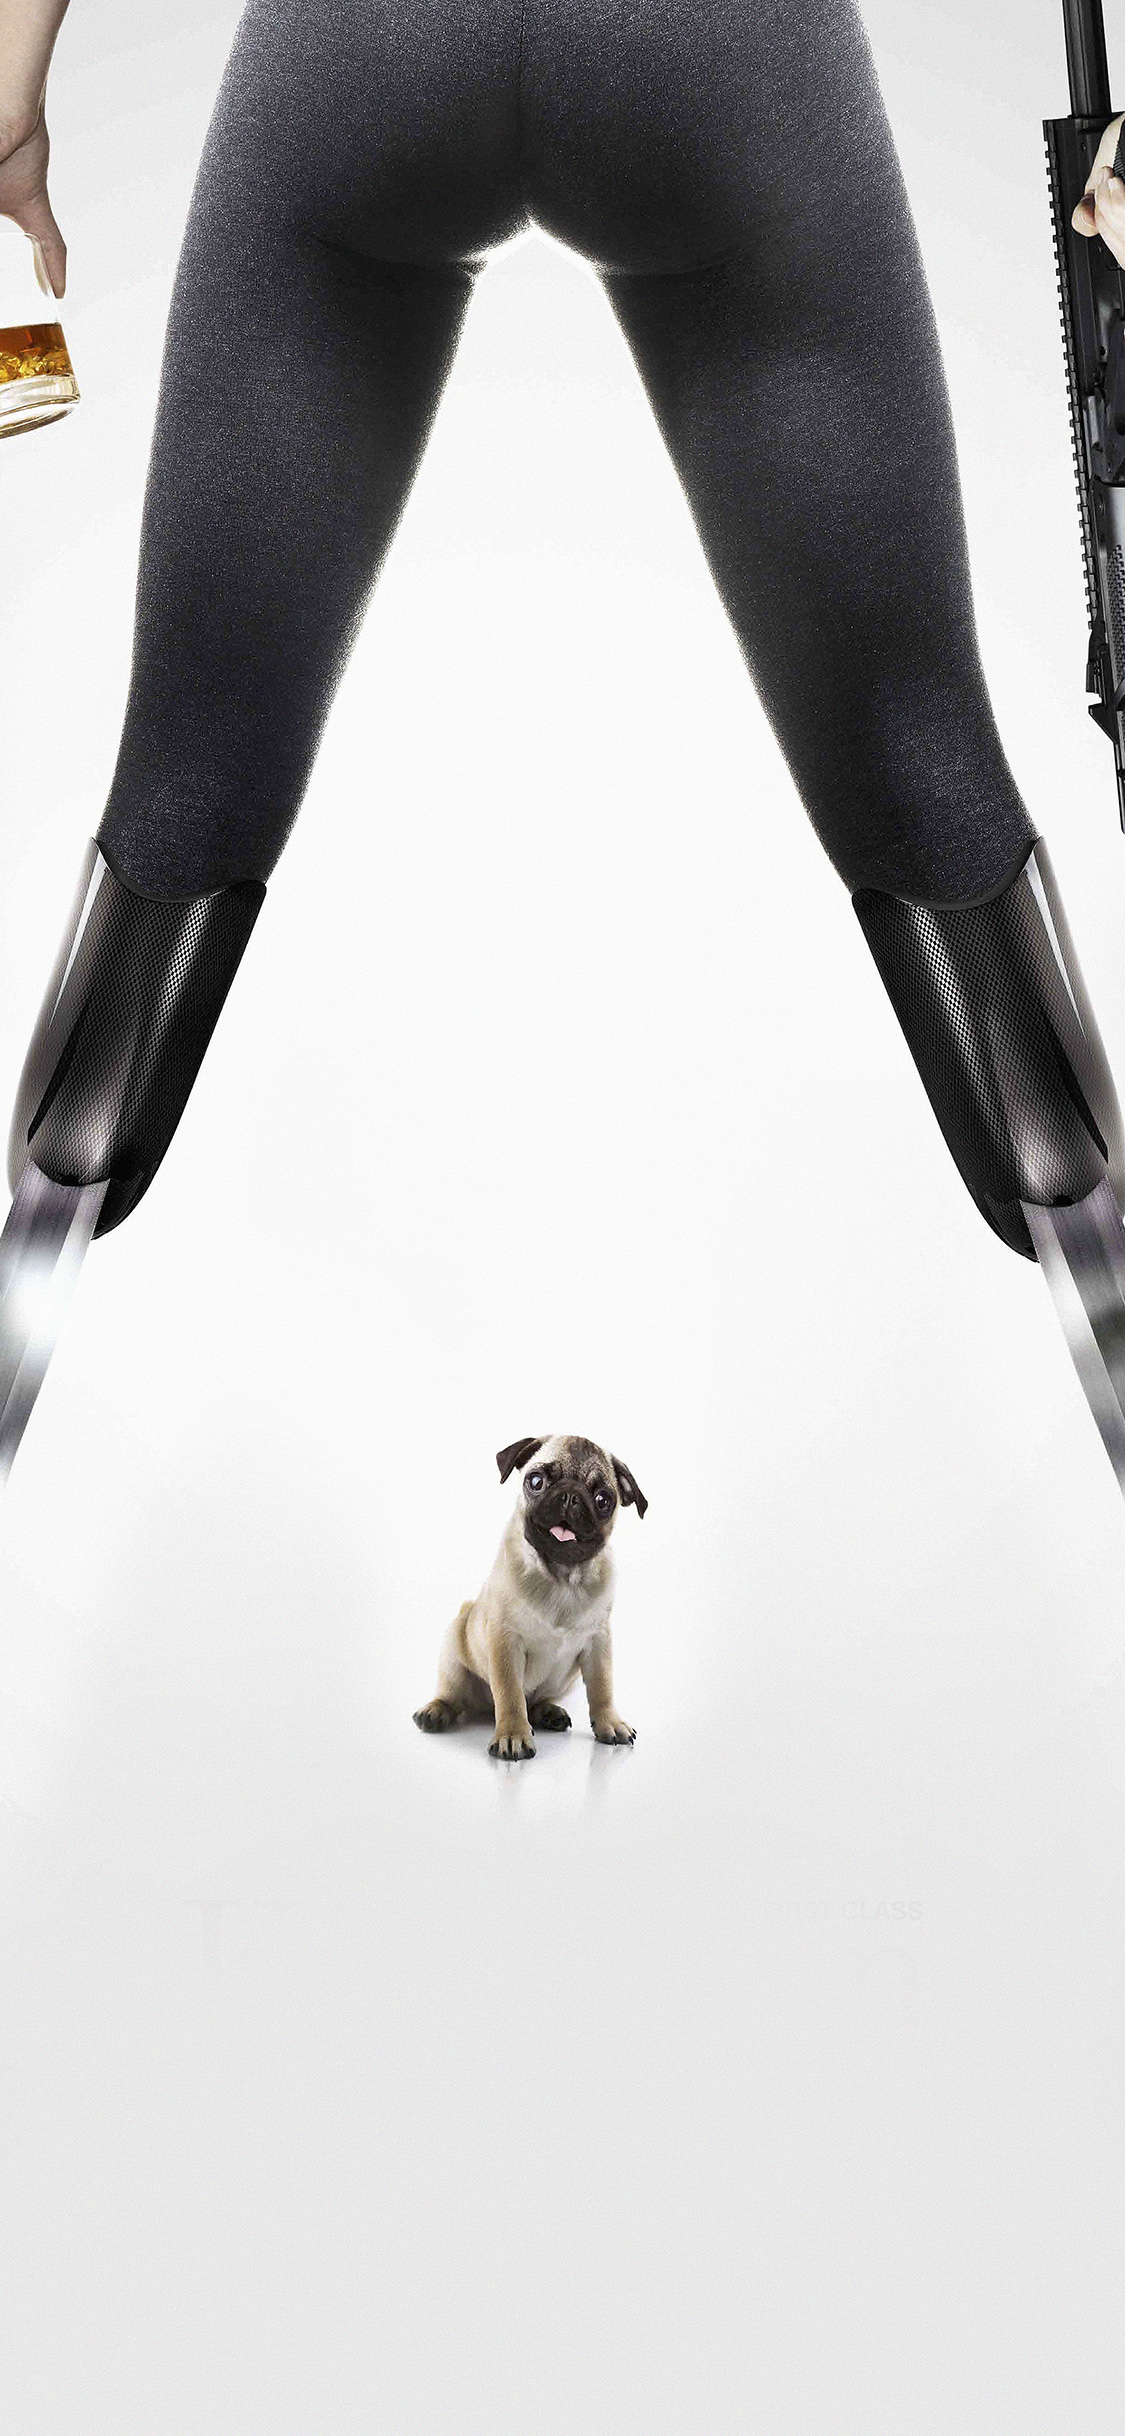 Iphone X - Kingsman With His Dog , HD Wallpaper & Backgrounds